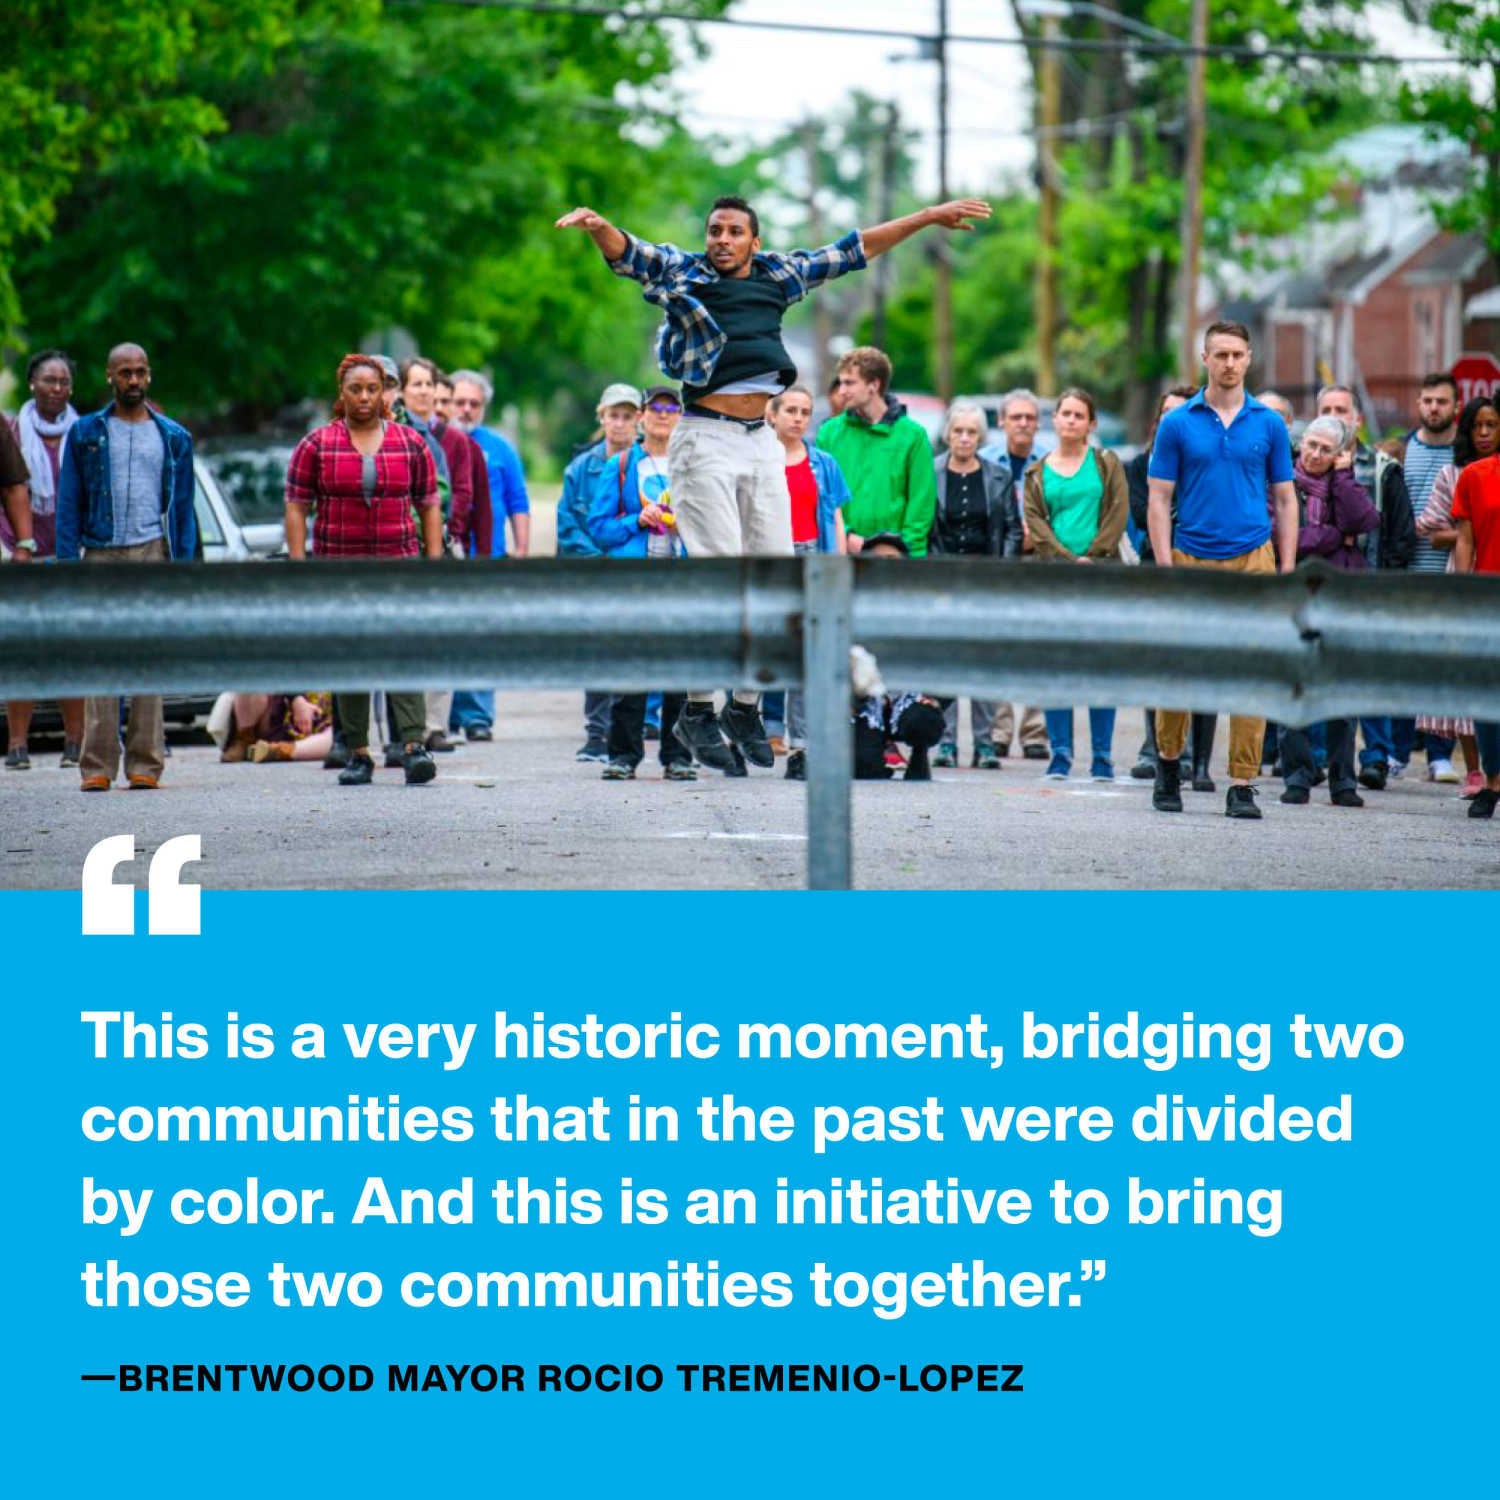 Mapping Racism event featured dancers interacting with the Windom Rd barrier in the North Brentwood community. Credit: Matt Roth